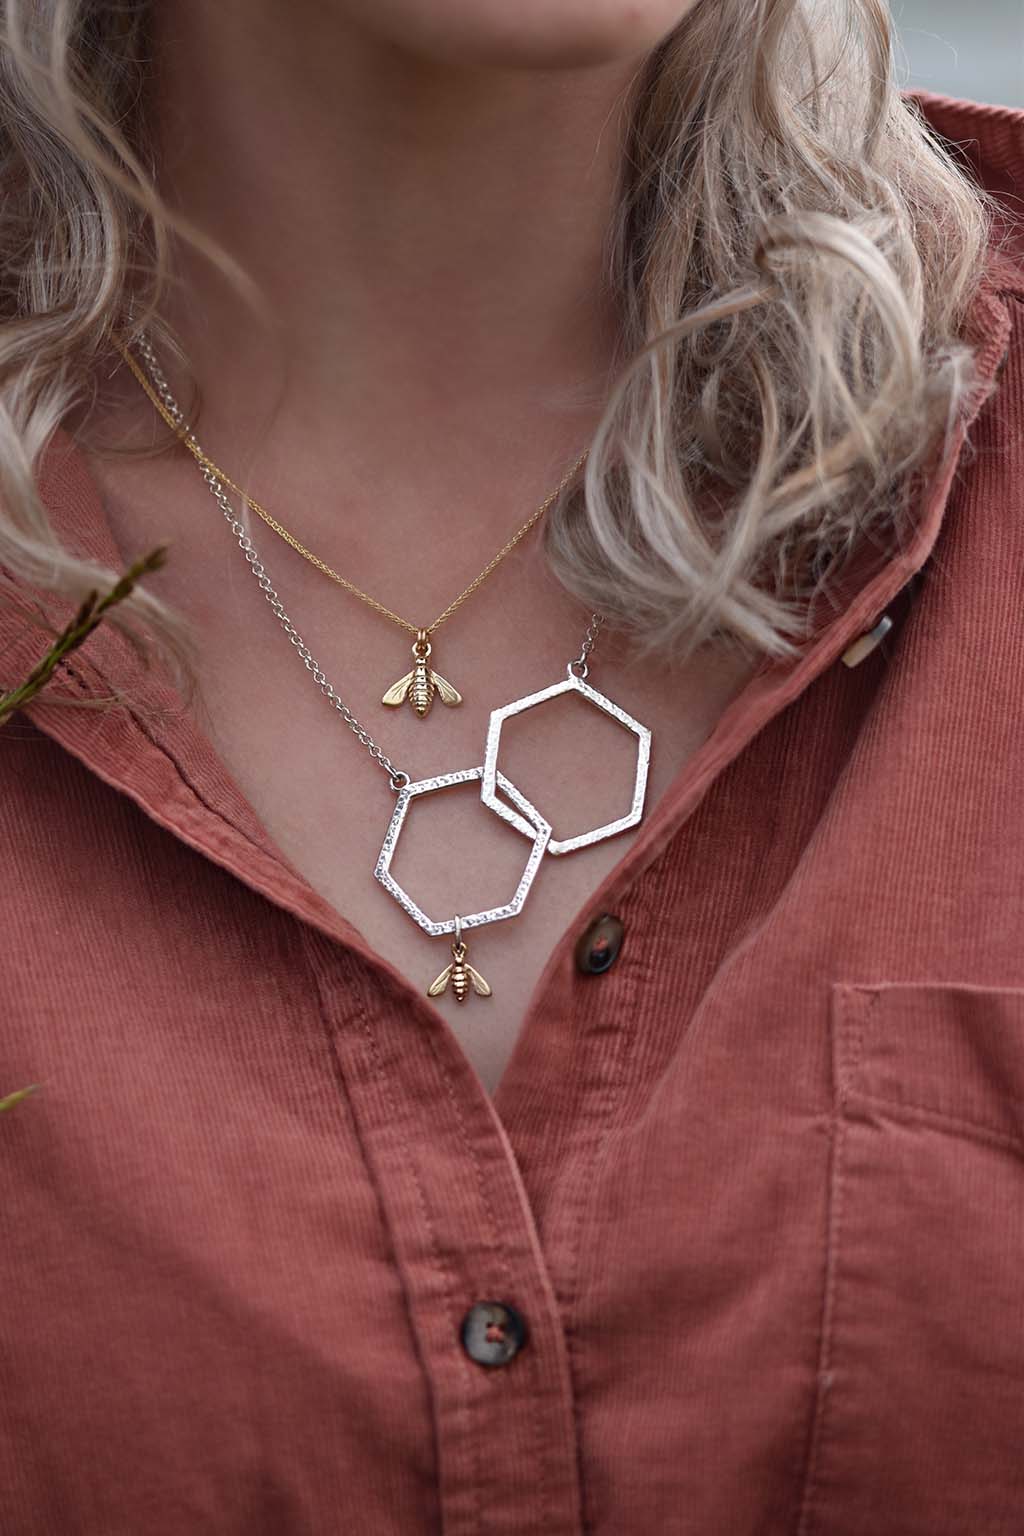 Sheila's new Honeybee necklaces are perfect for layering